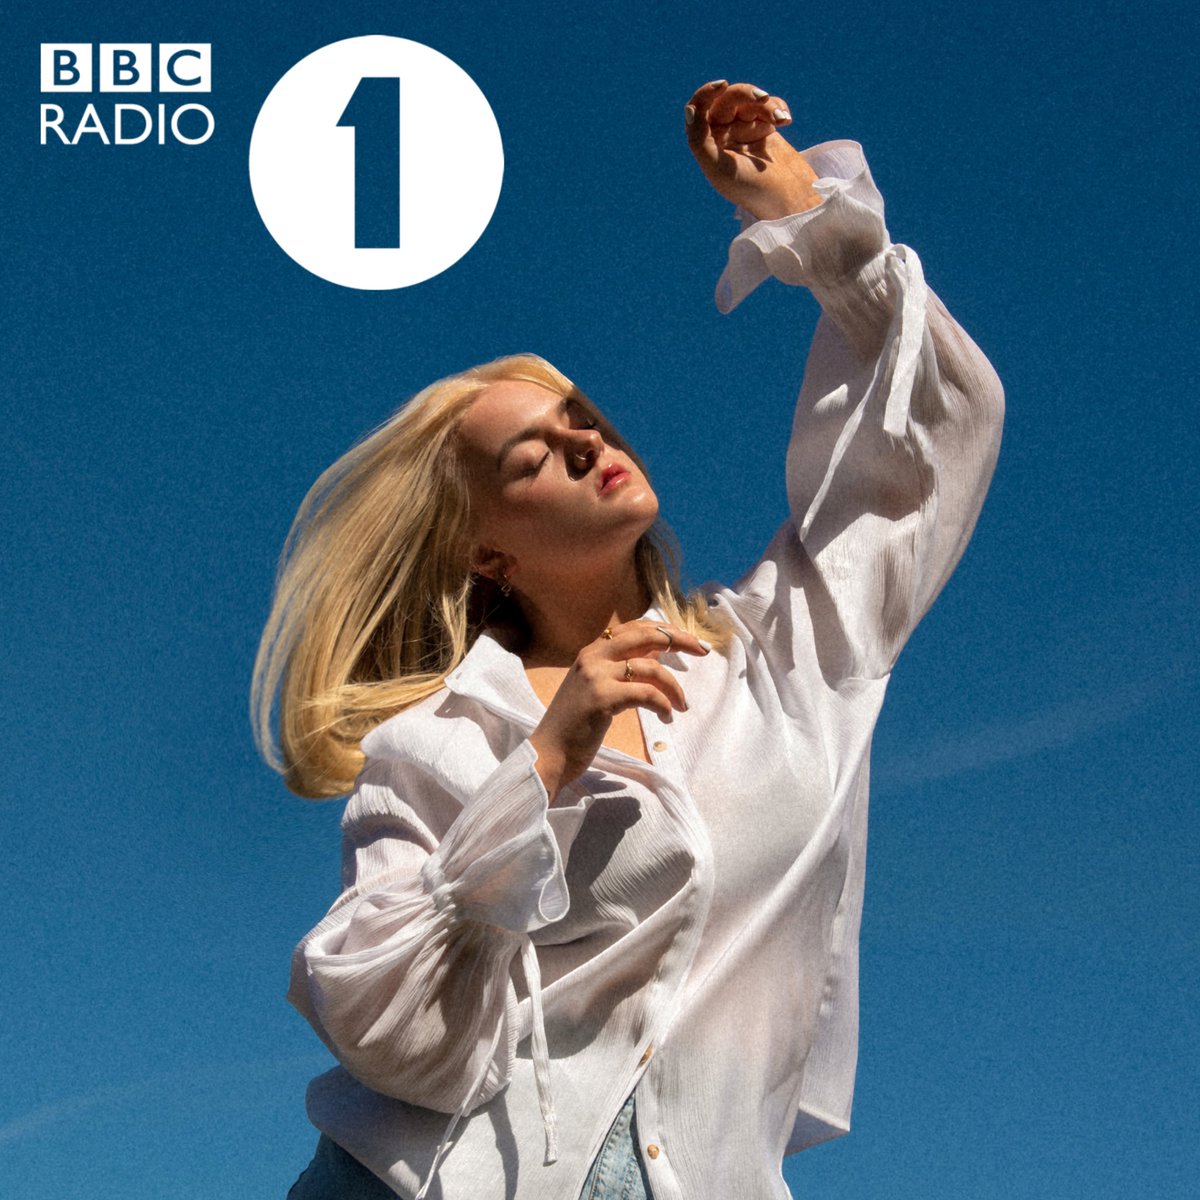 Tune into @BBCR1 at 12:45pm today to catch my chat with the lovely @SteveHReports talking all about my new song ‘roots’ on @BBCNewsbeat 💞